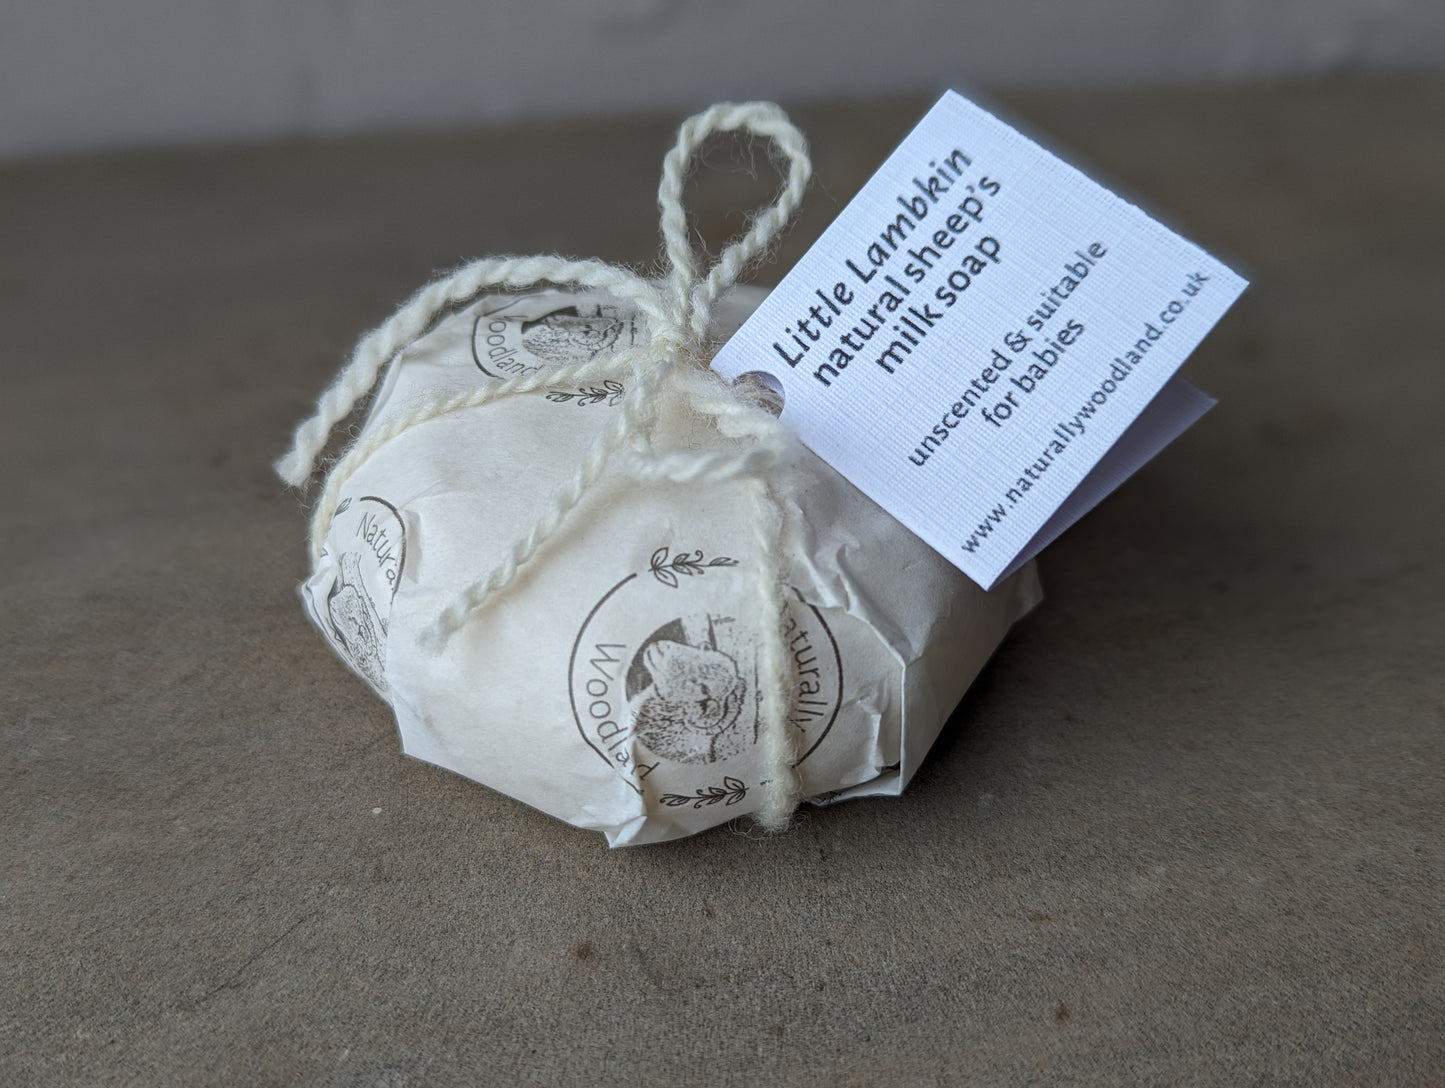 Naturally Woodland Little Lambkin natural sheep milk soap unscented and suitable for babies